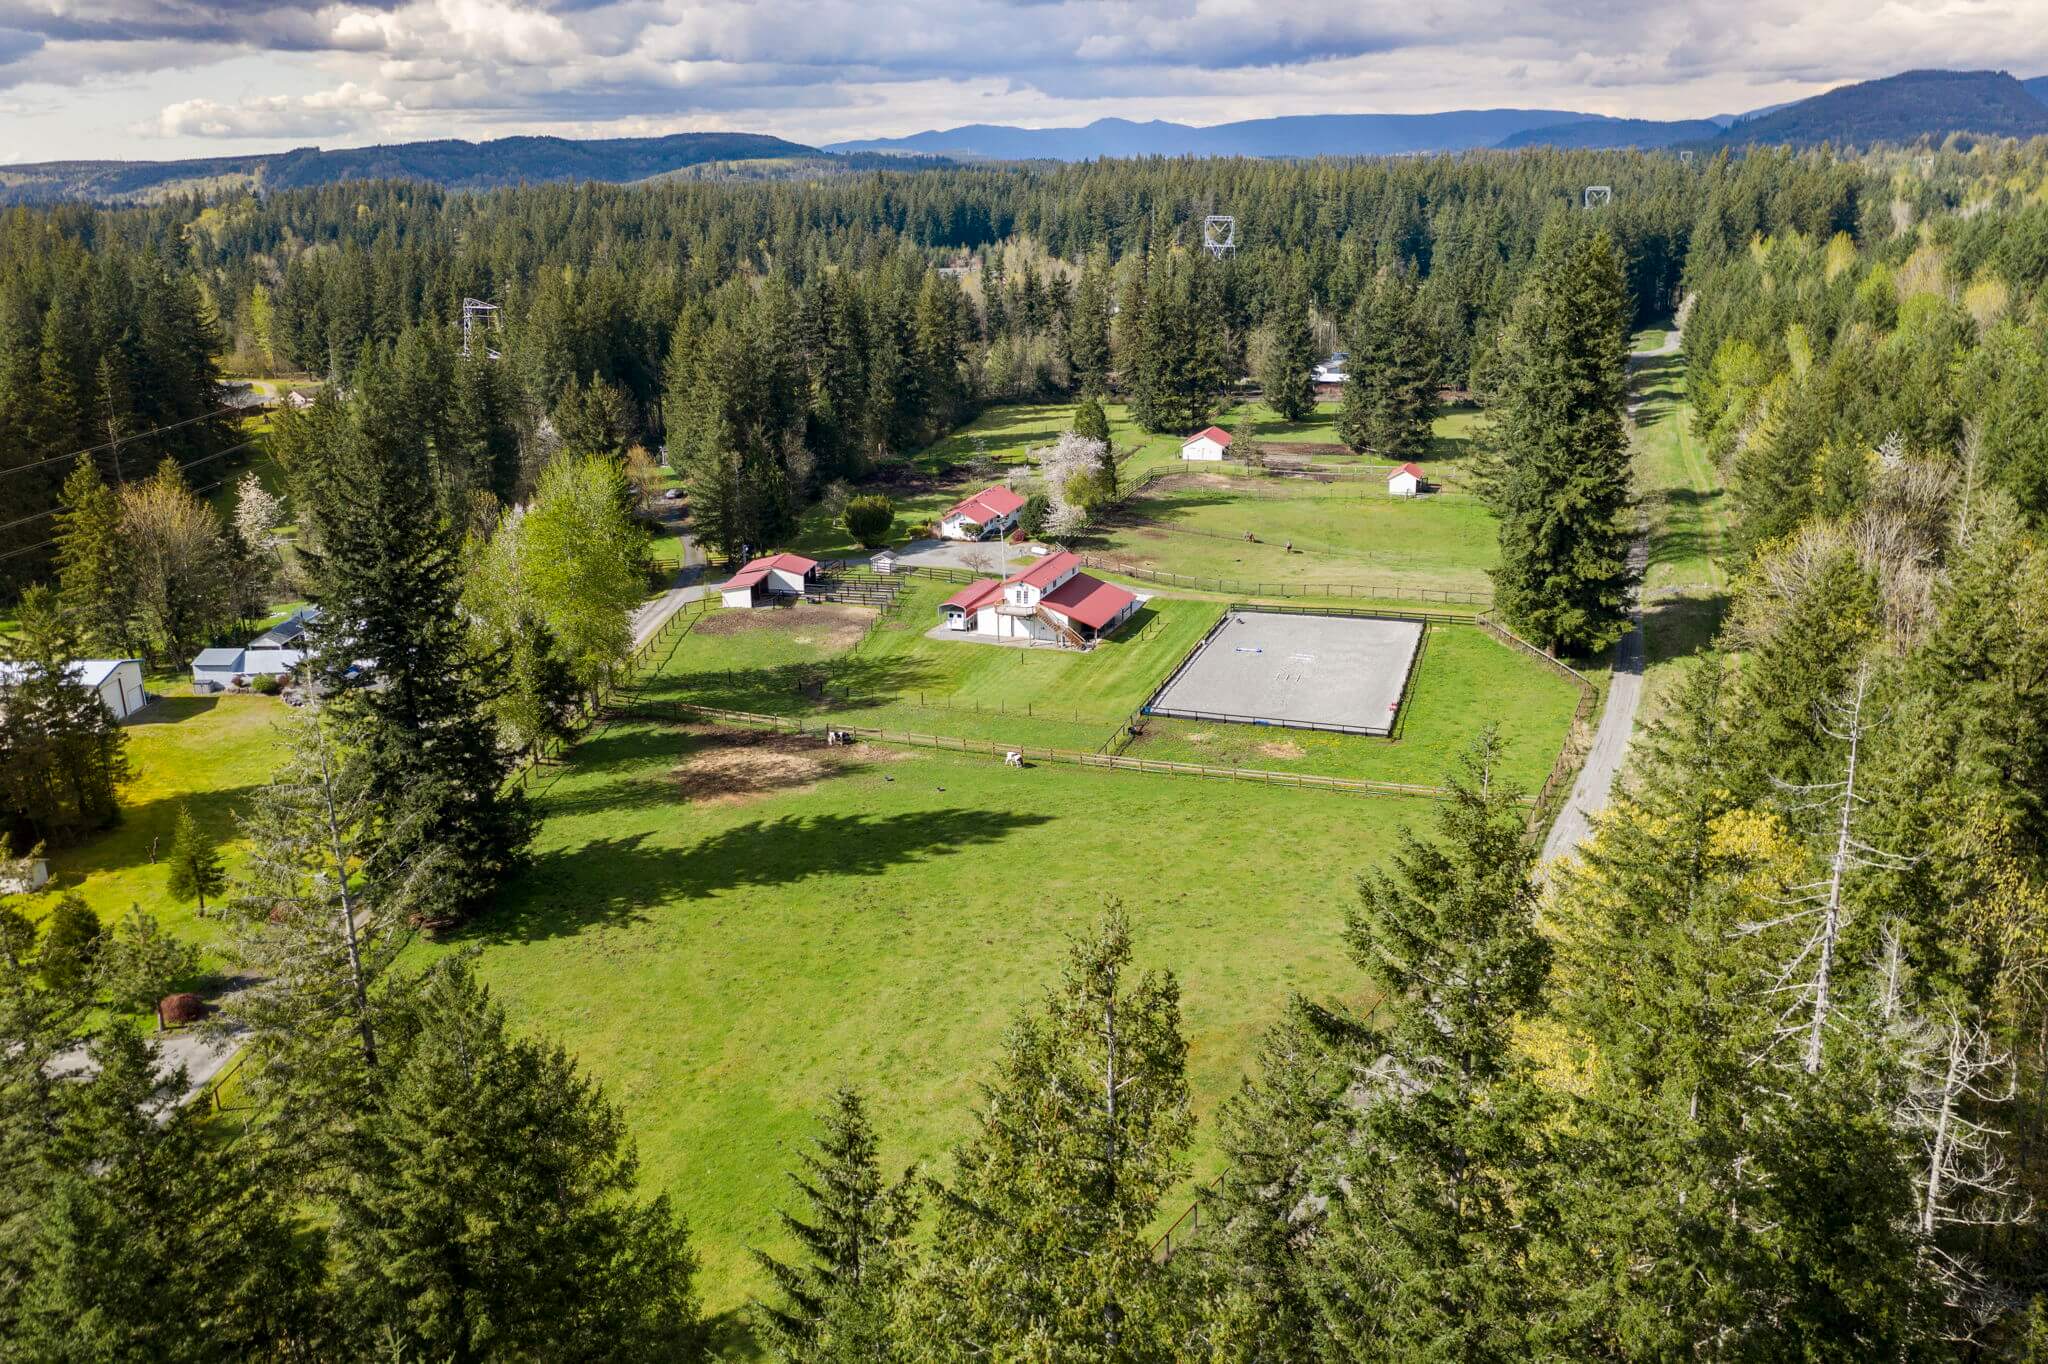 The farm includes a main house, a guest apartment, four barns and an outdoor arena